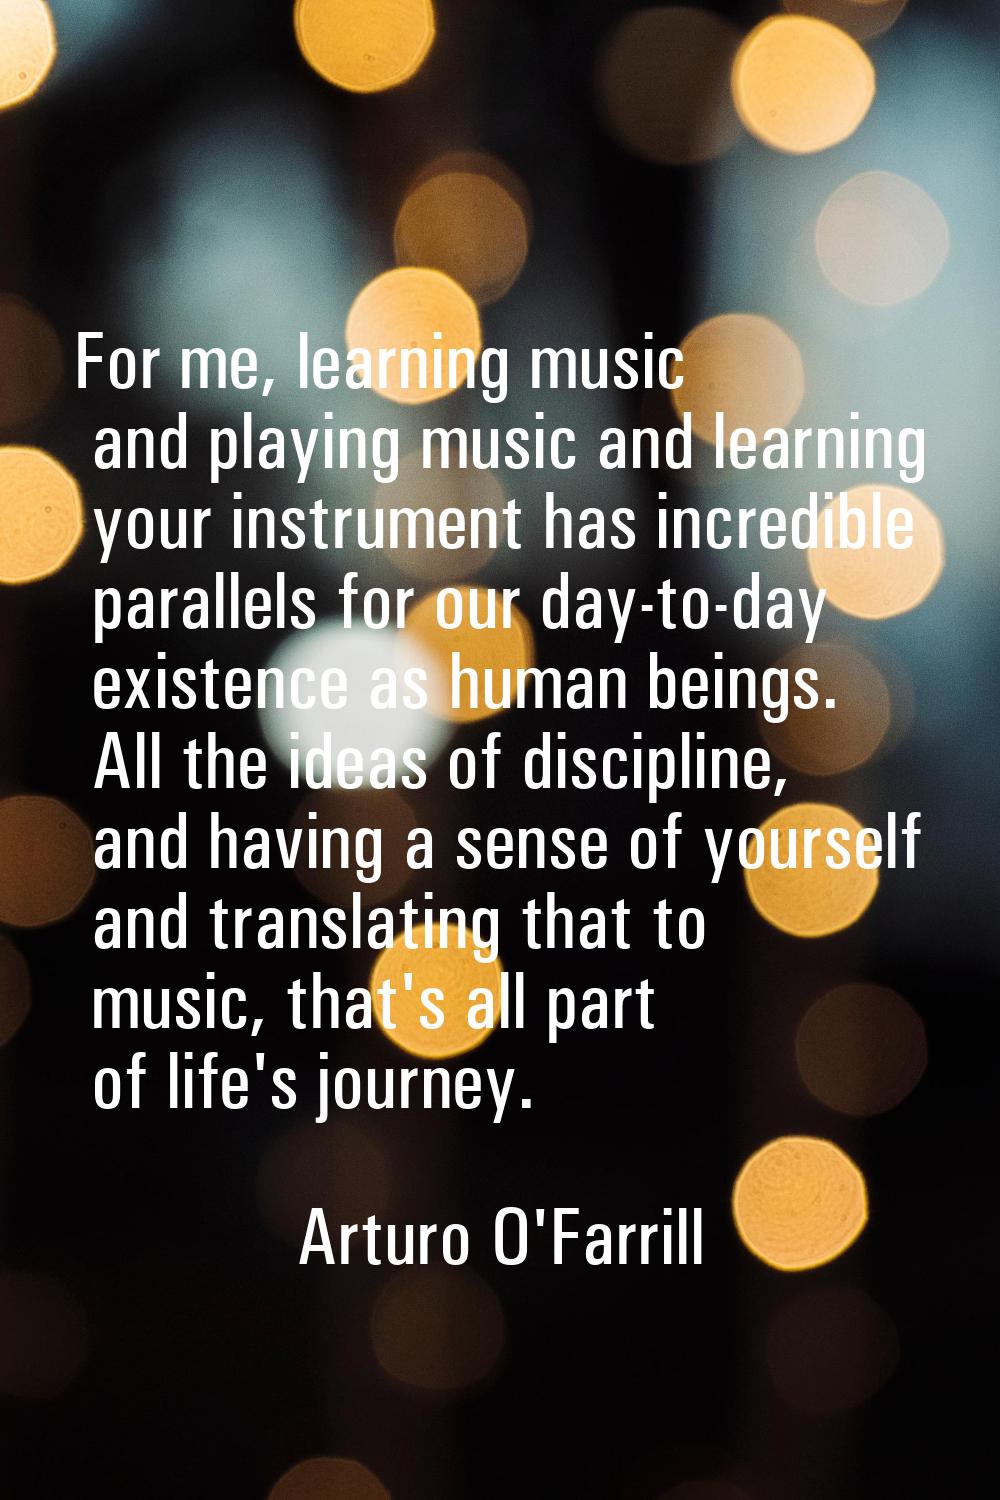 For me, learning music and playing music and learning your instrument has incredible parallels for 